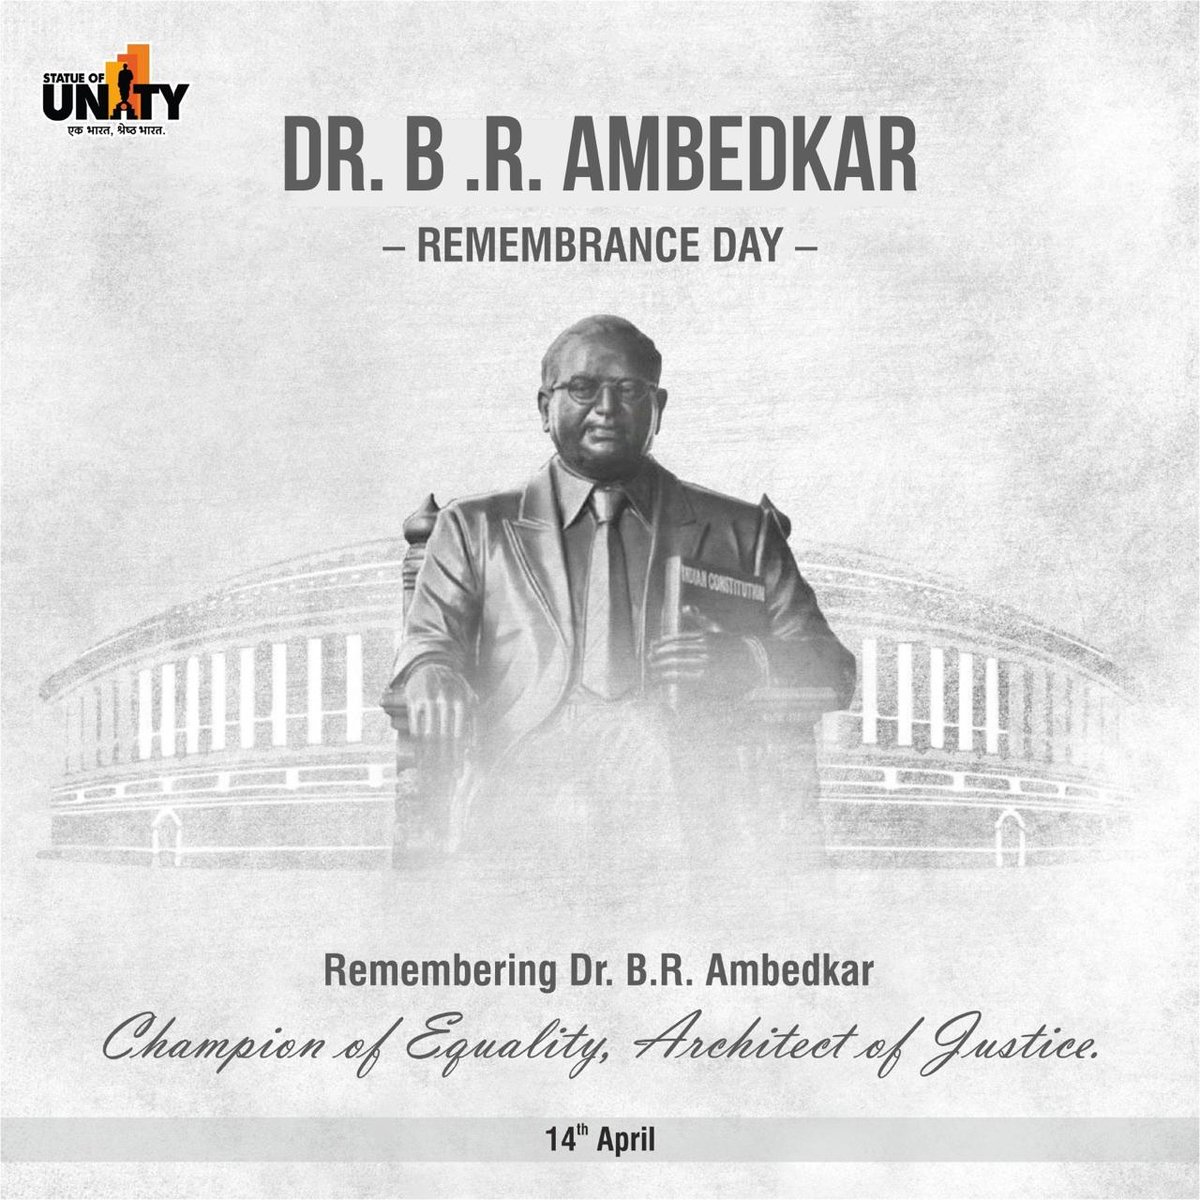 Today, #EktaNagar pays homage to the visionary architect of India's constitution, Dr. B.R. Ambedkar, on his remembrance day. Let us reflect on his teachings and strive to build a more inclusive society. #AmbedkarRemembranceDay #SocialJustice @MukeshPuri26 @udit_ias